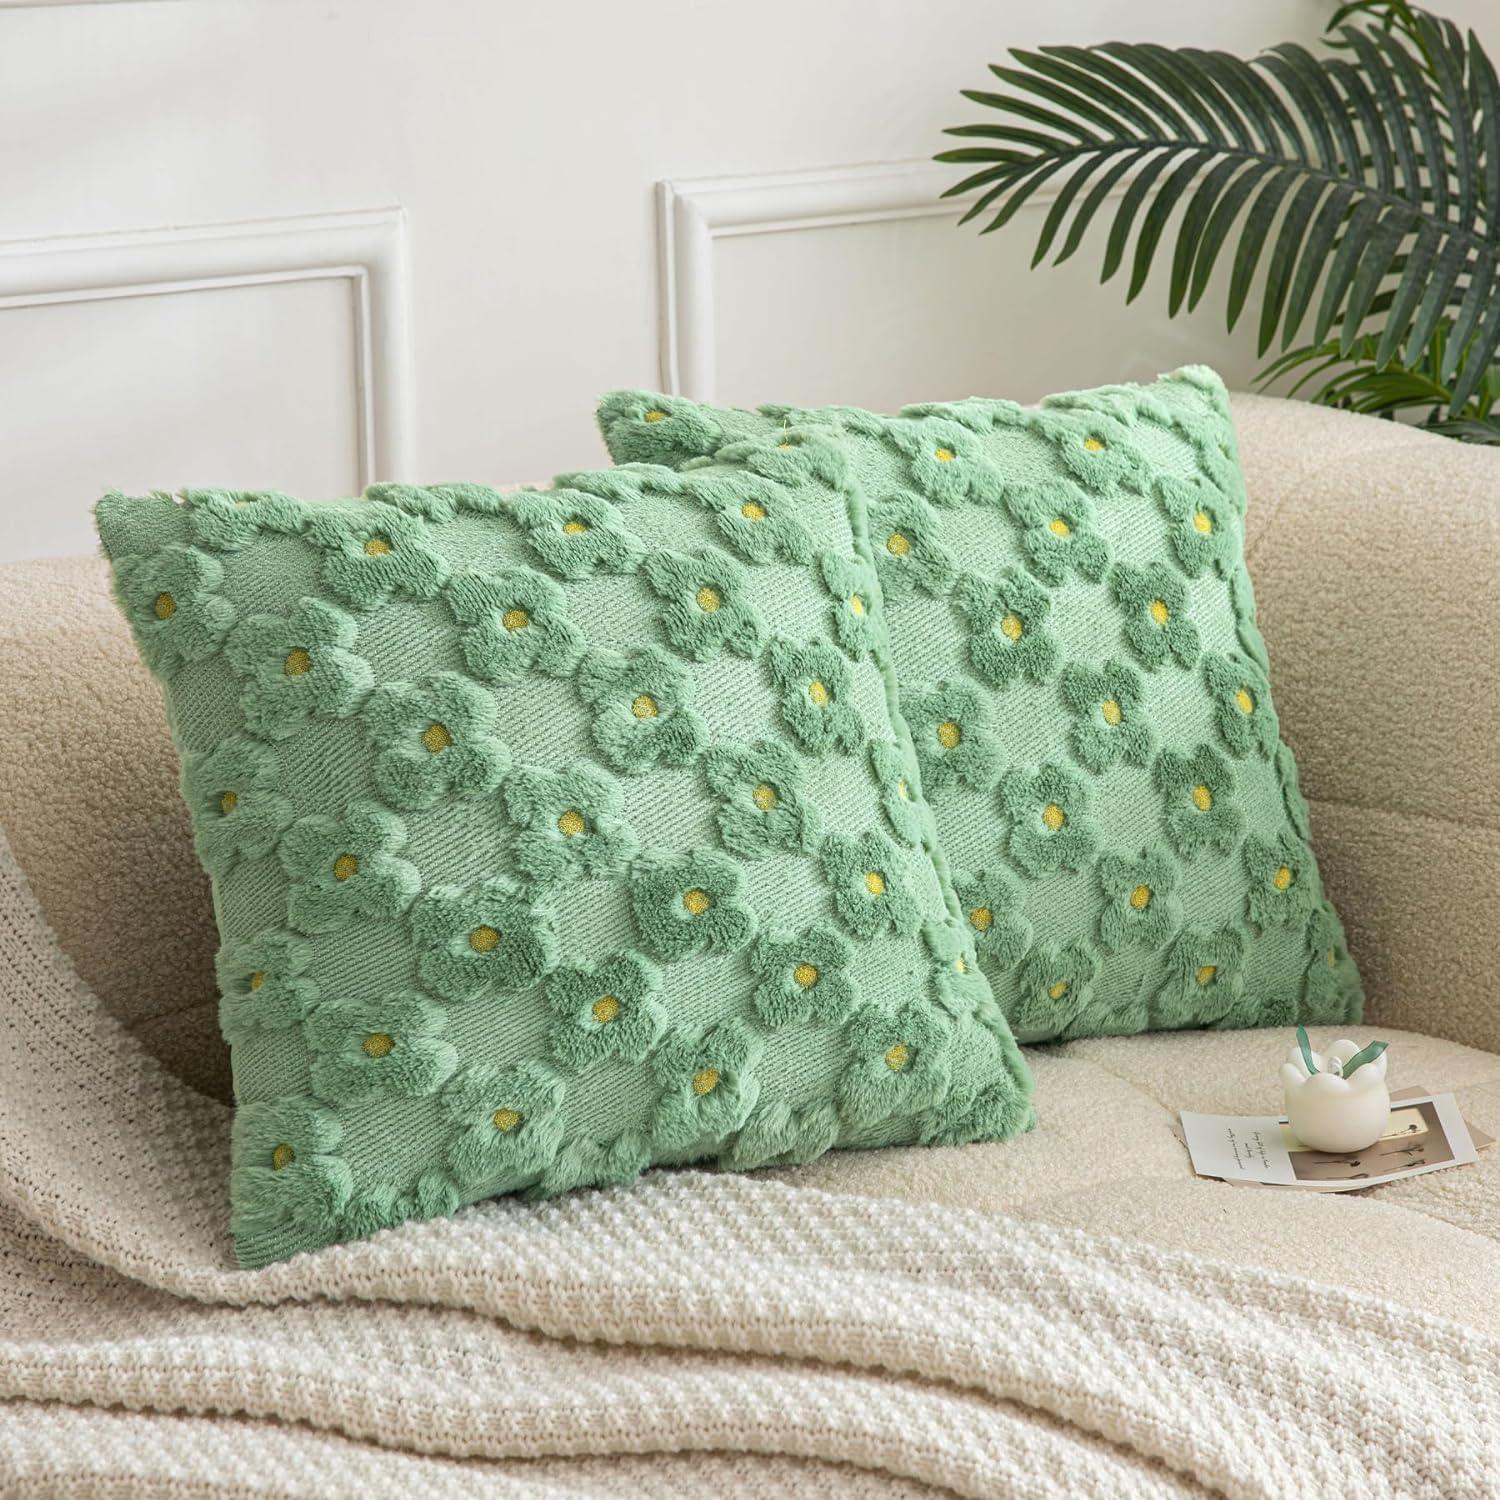 50% off of pillow cover sets with code: 27AKMNS5 at checkout (Works on all options)!